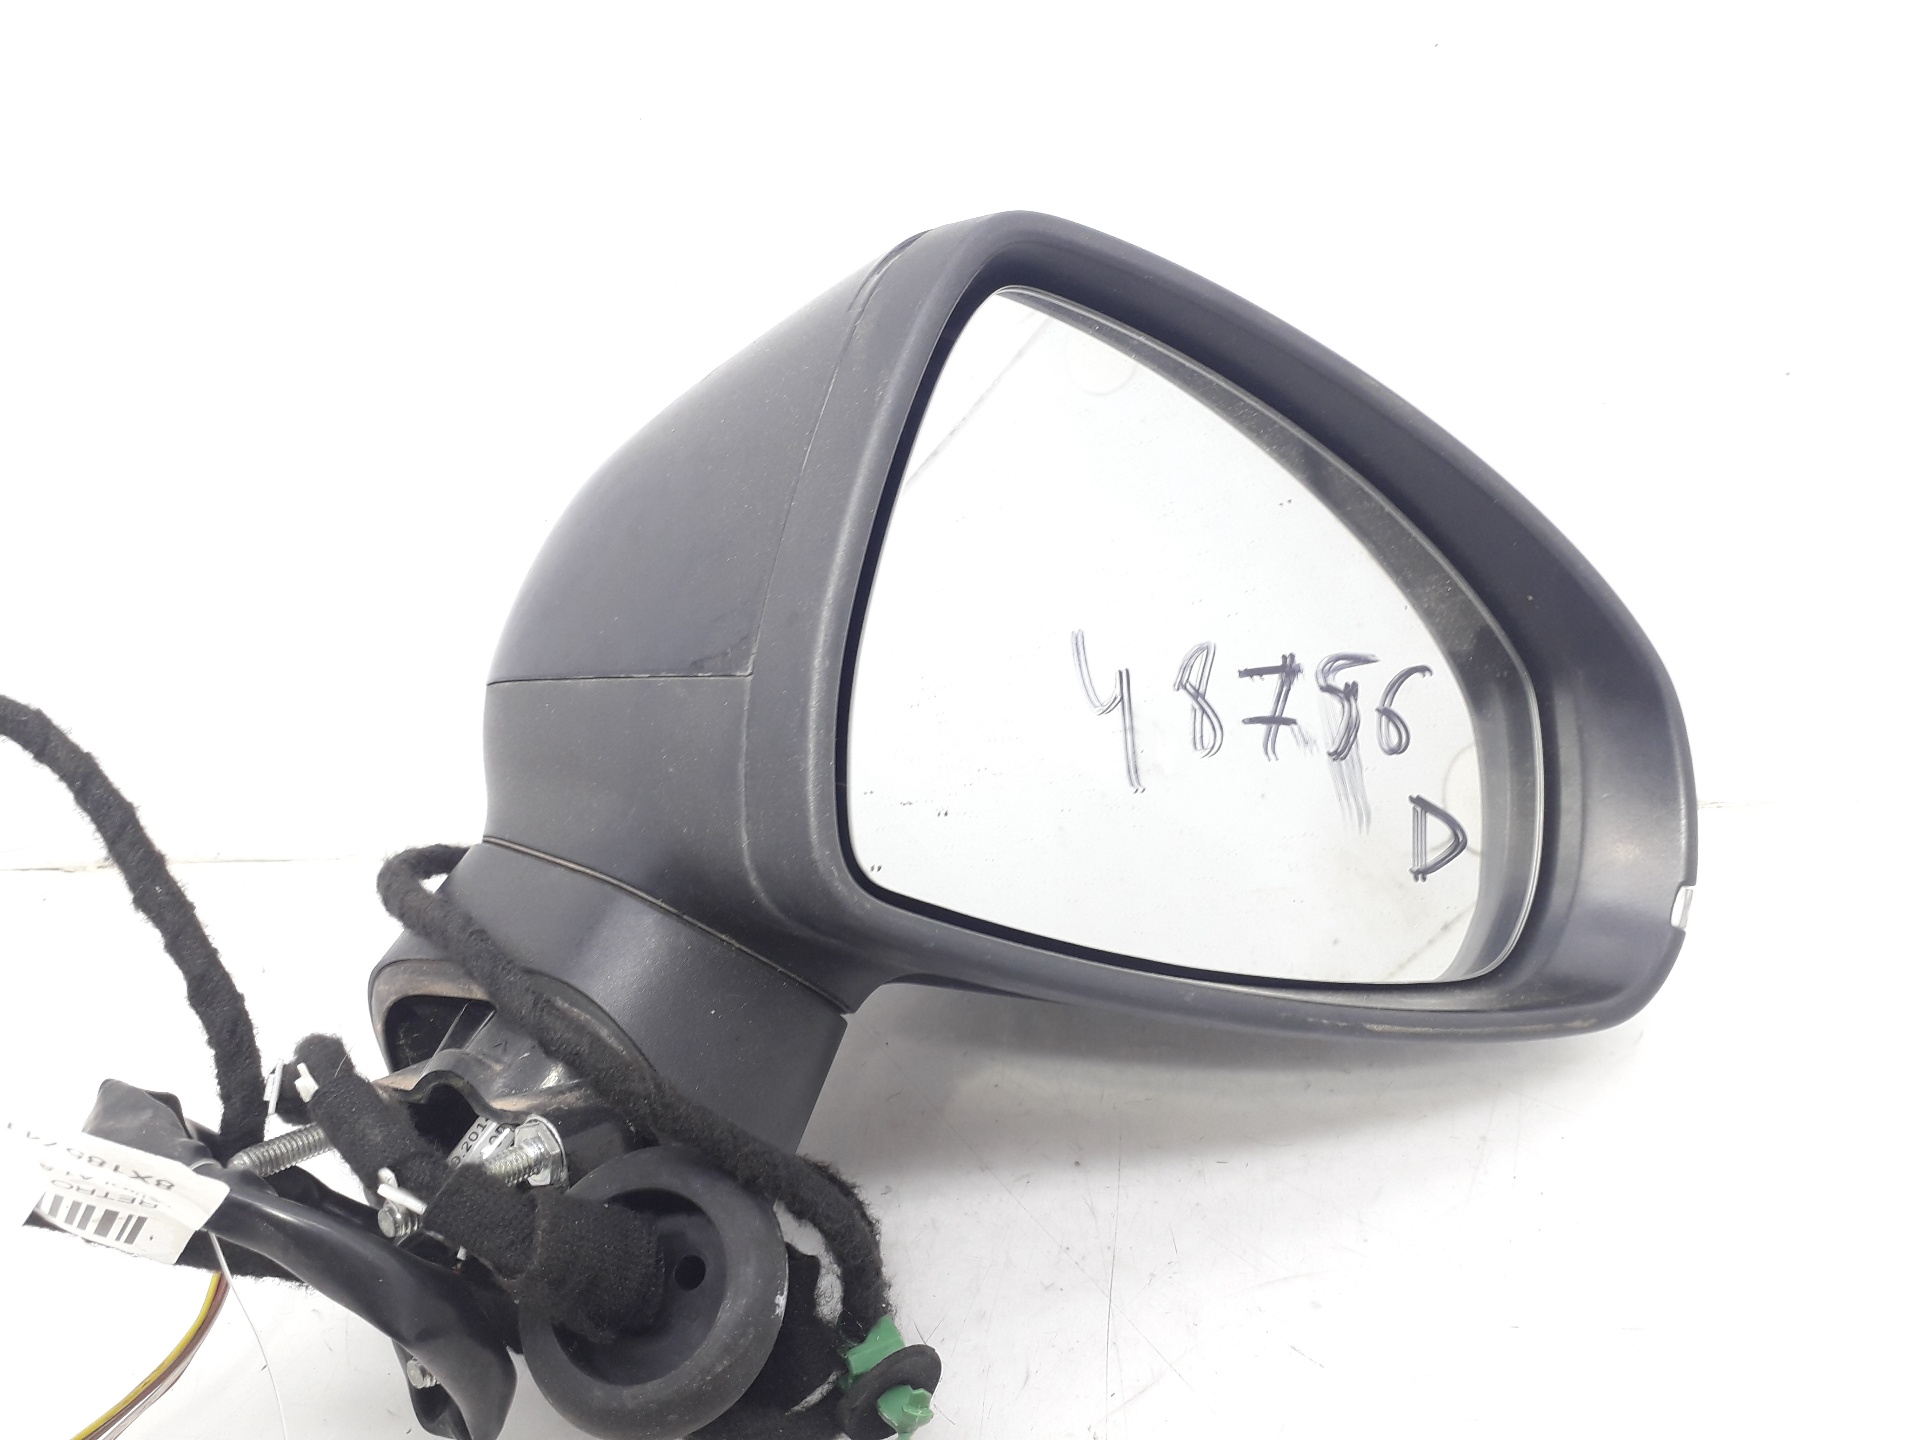 AUDI A7 C7/4G (2010-2020) Right Side Wing Mirror 8X1857410S, 72.681KMS, 5PUERTAS 18798859